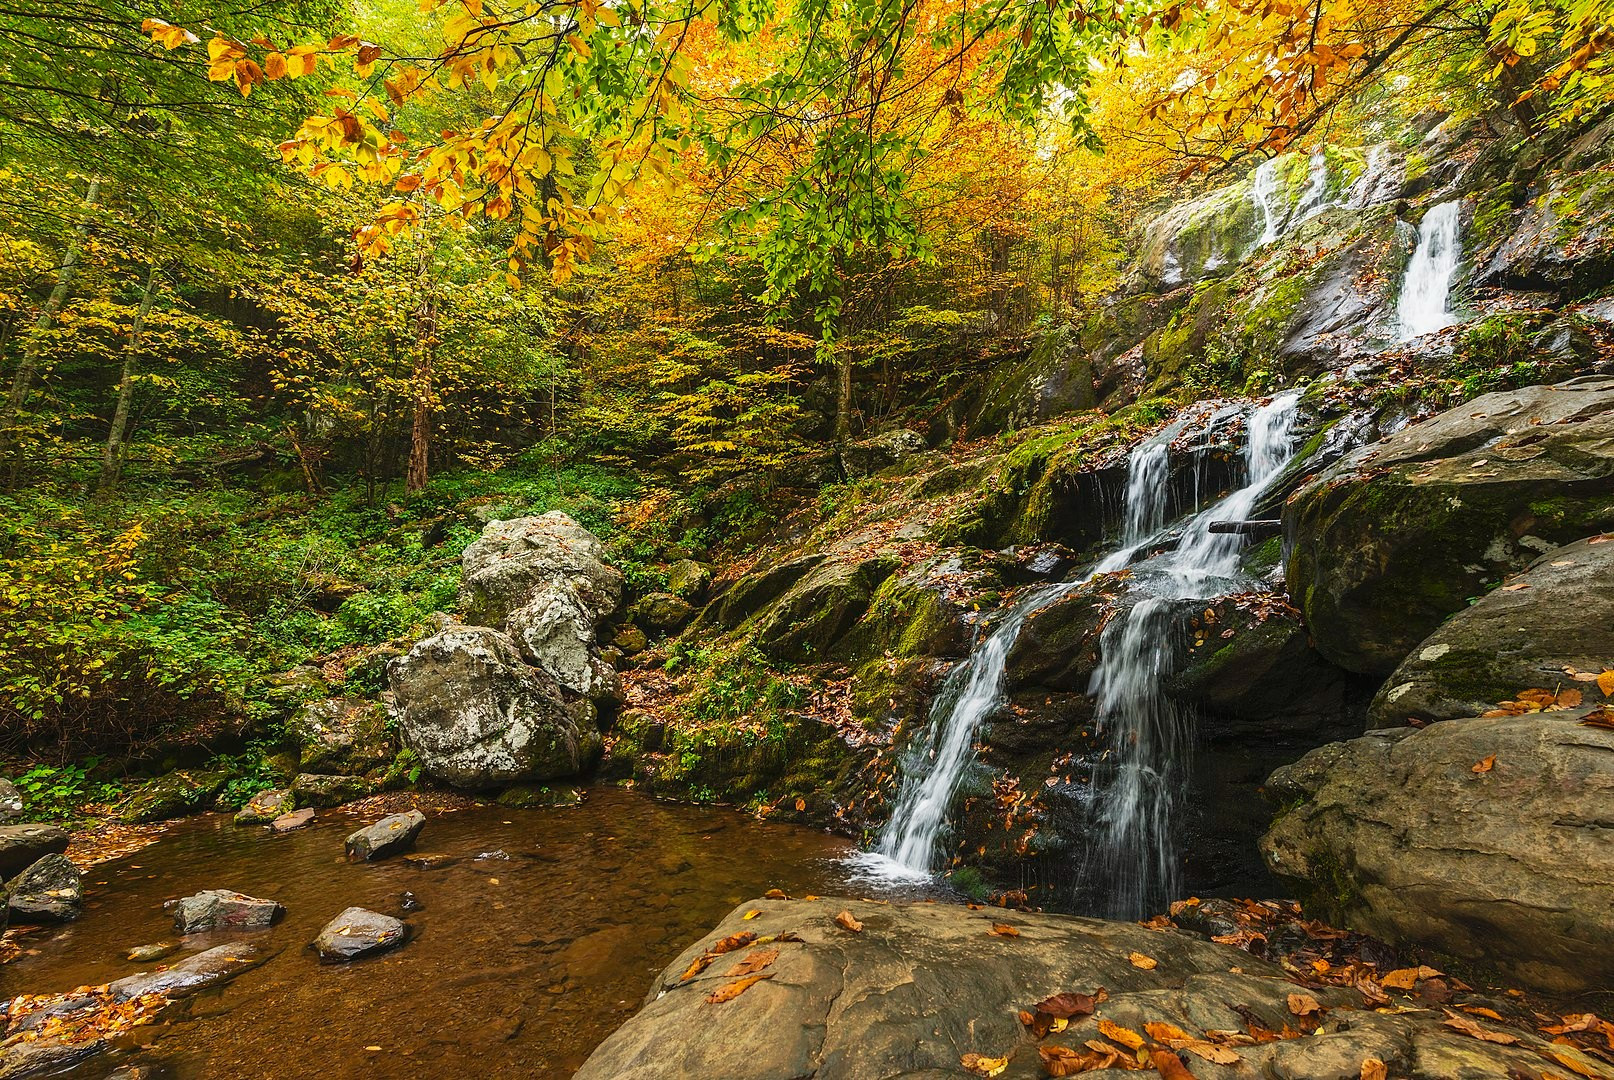 By Shenandoah National Park from Virginia - Early Fall at Dark Hollow Falls, Public Domain, https://commons.wikimedia.org/w/index.php?curid=45094938